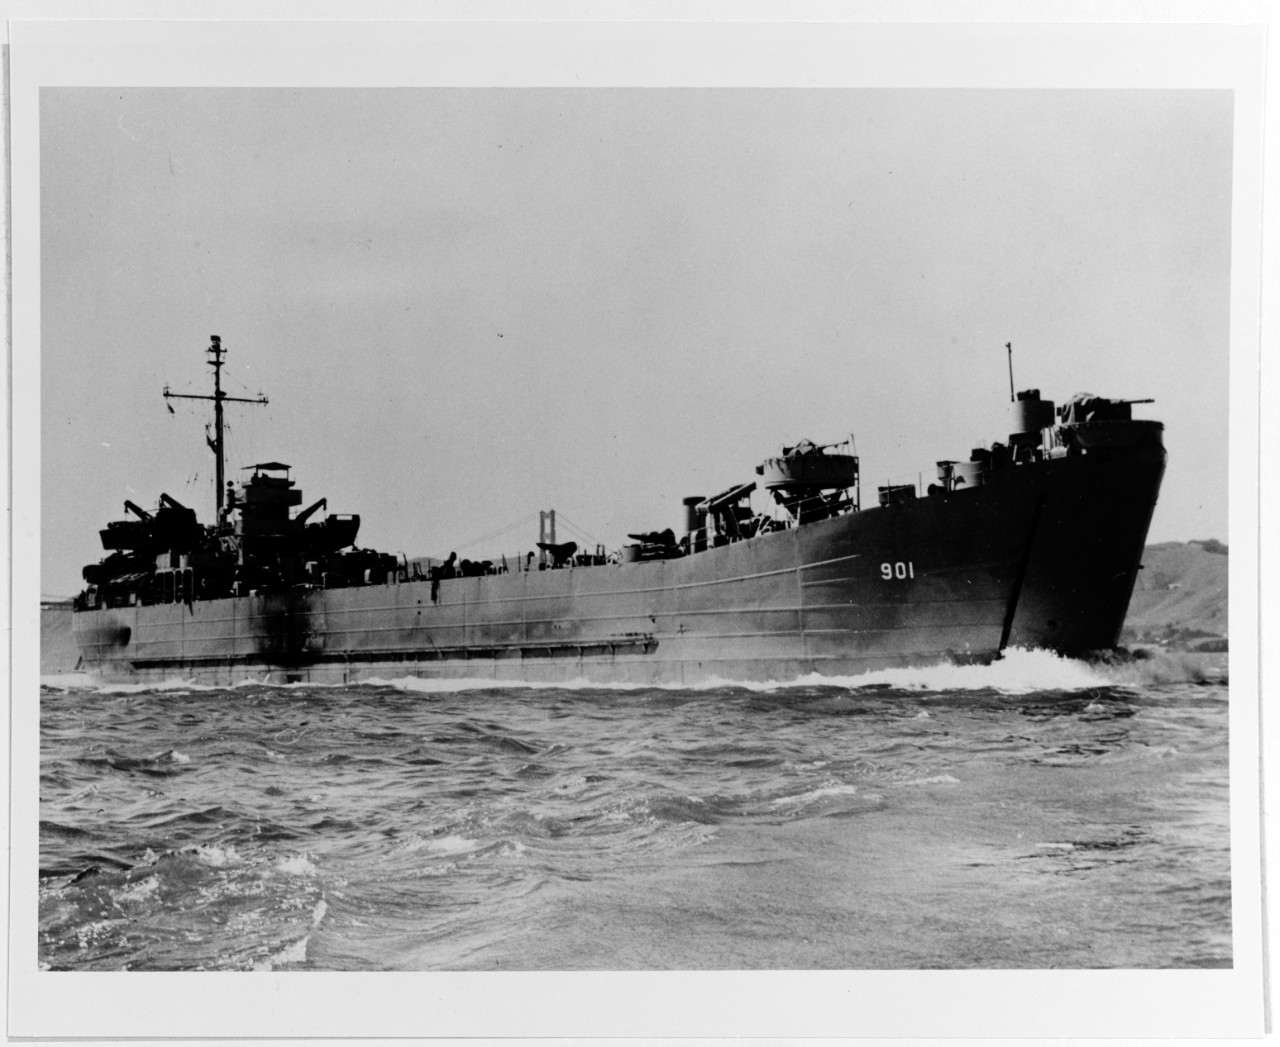 USS LST-901 (later:  LITCHFIELD COUNTY)